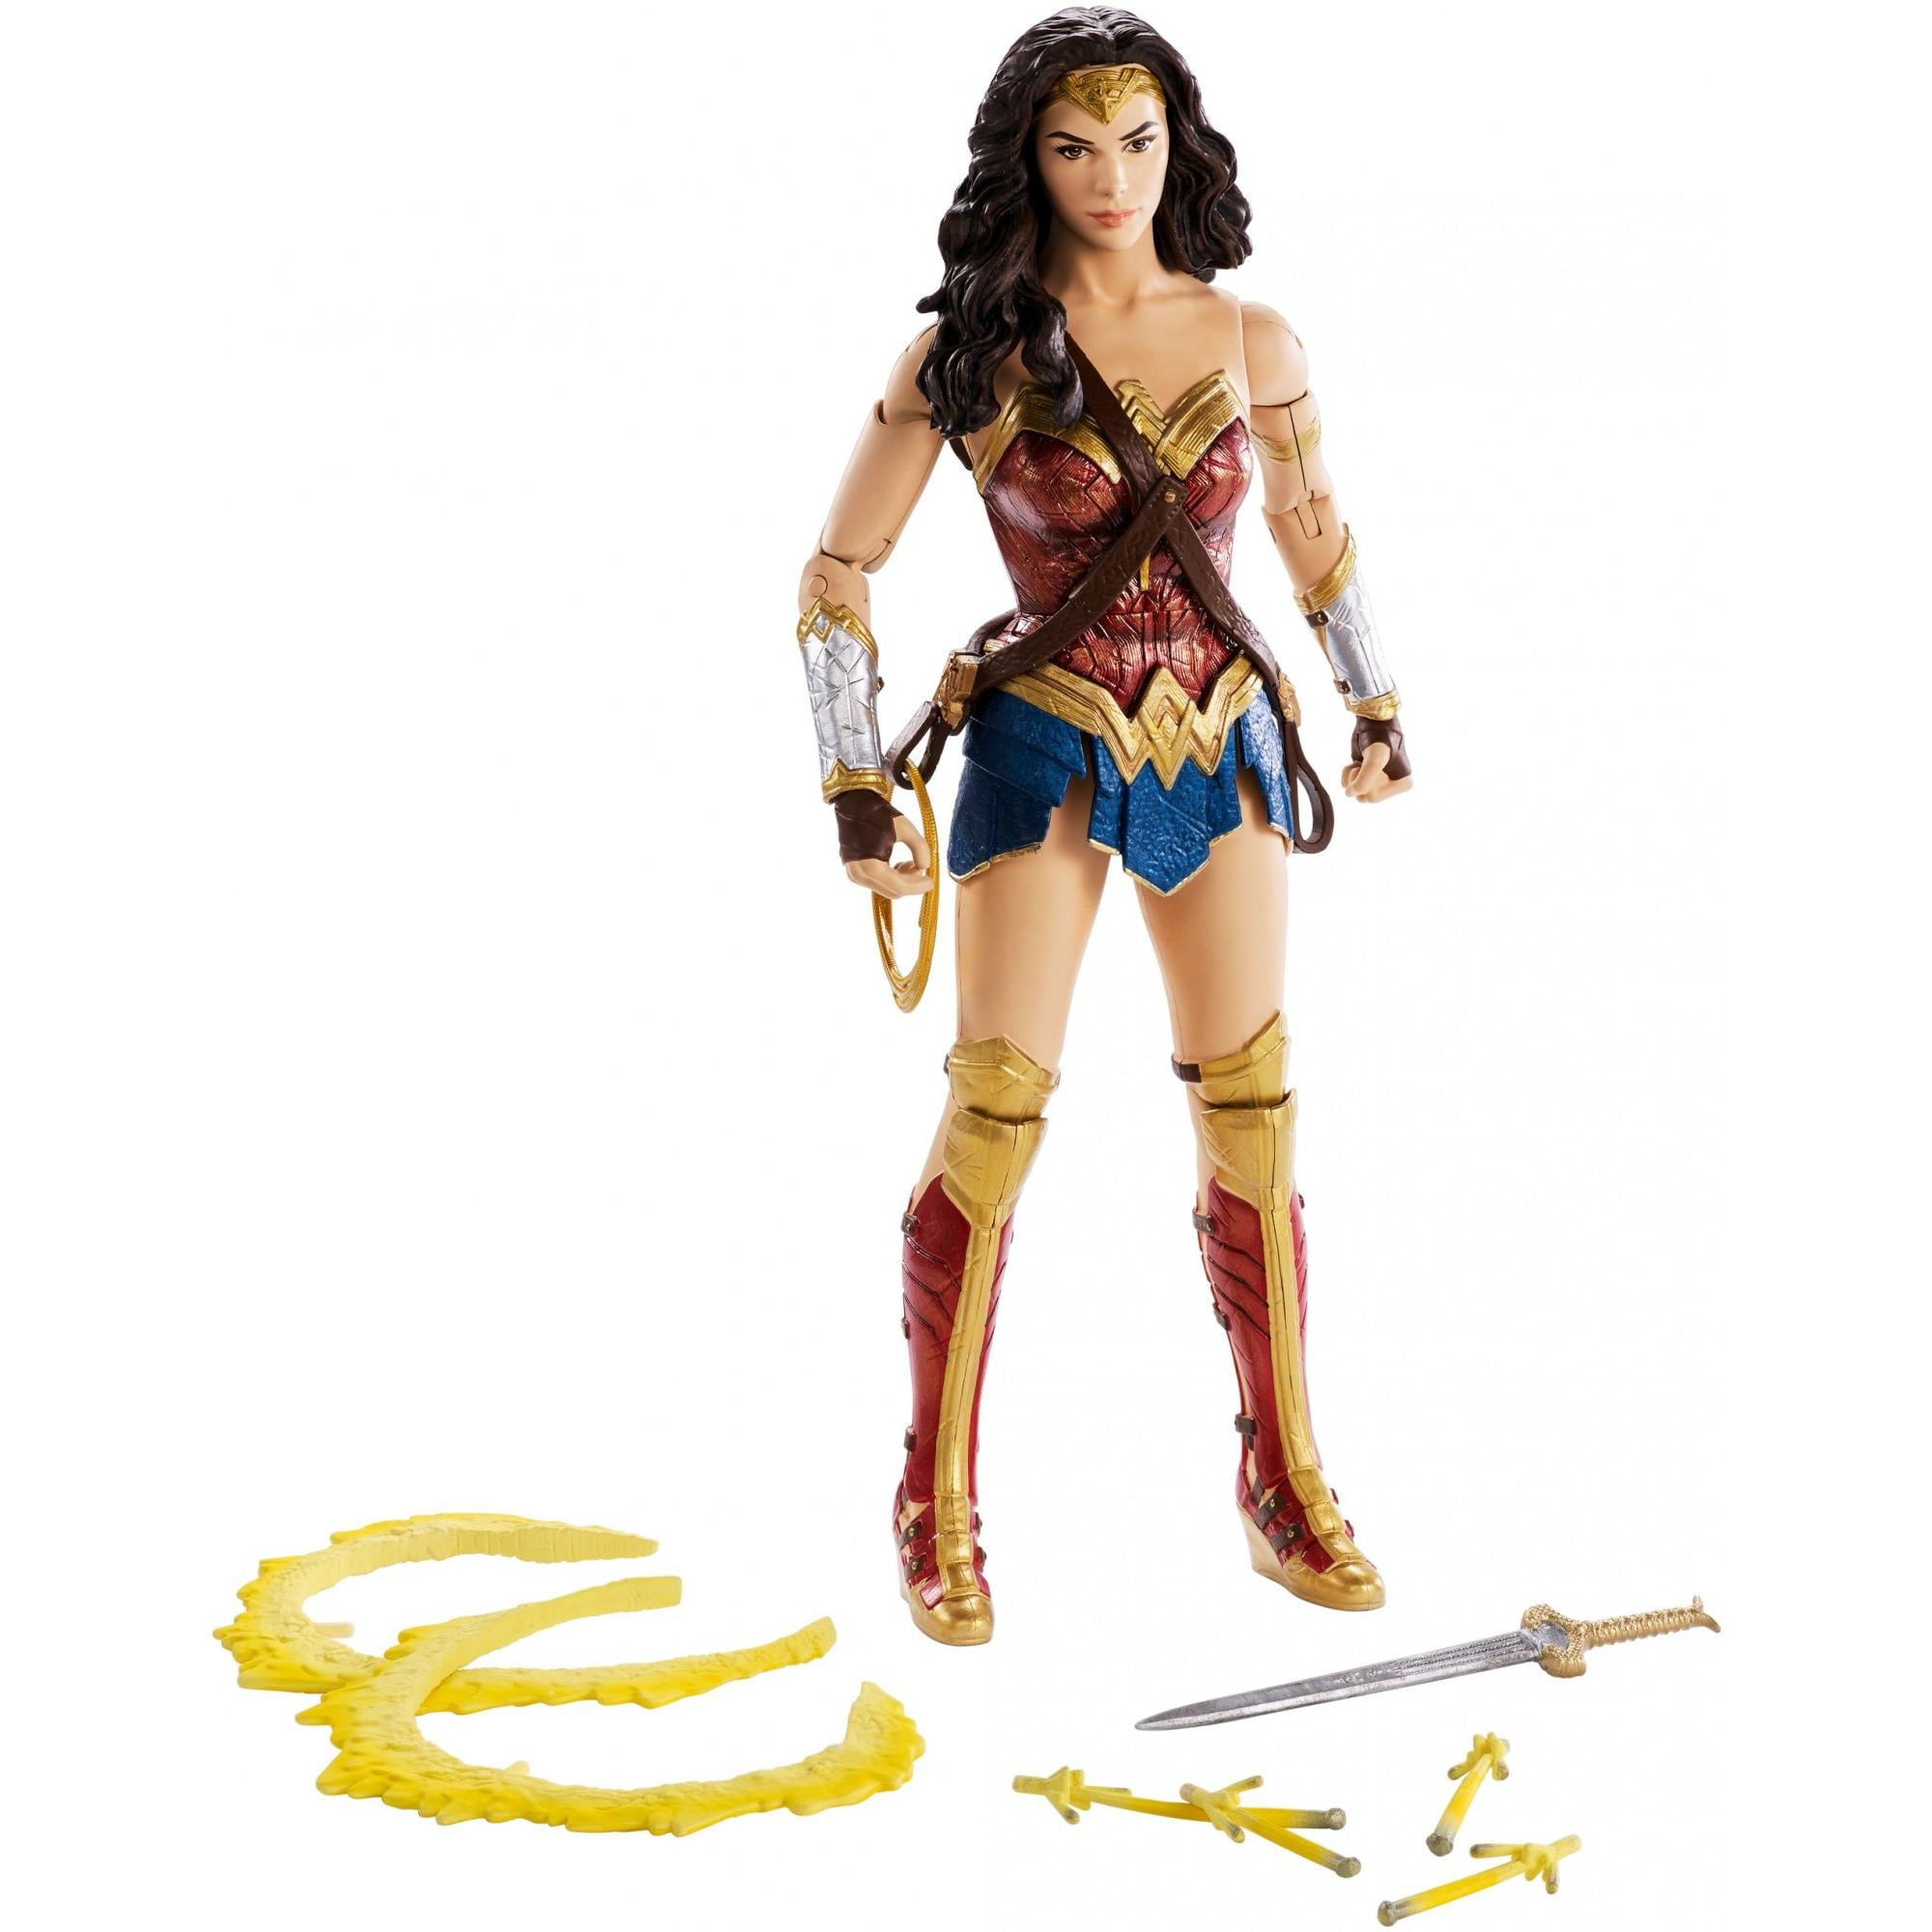 DC Comics Designer Series Wonder Woman Action Figure NEW Toys and Collectibles 